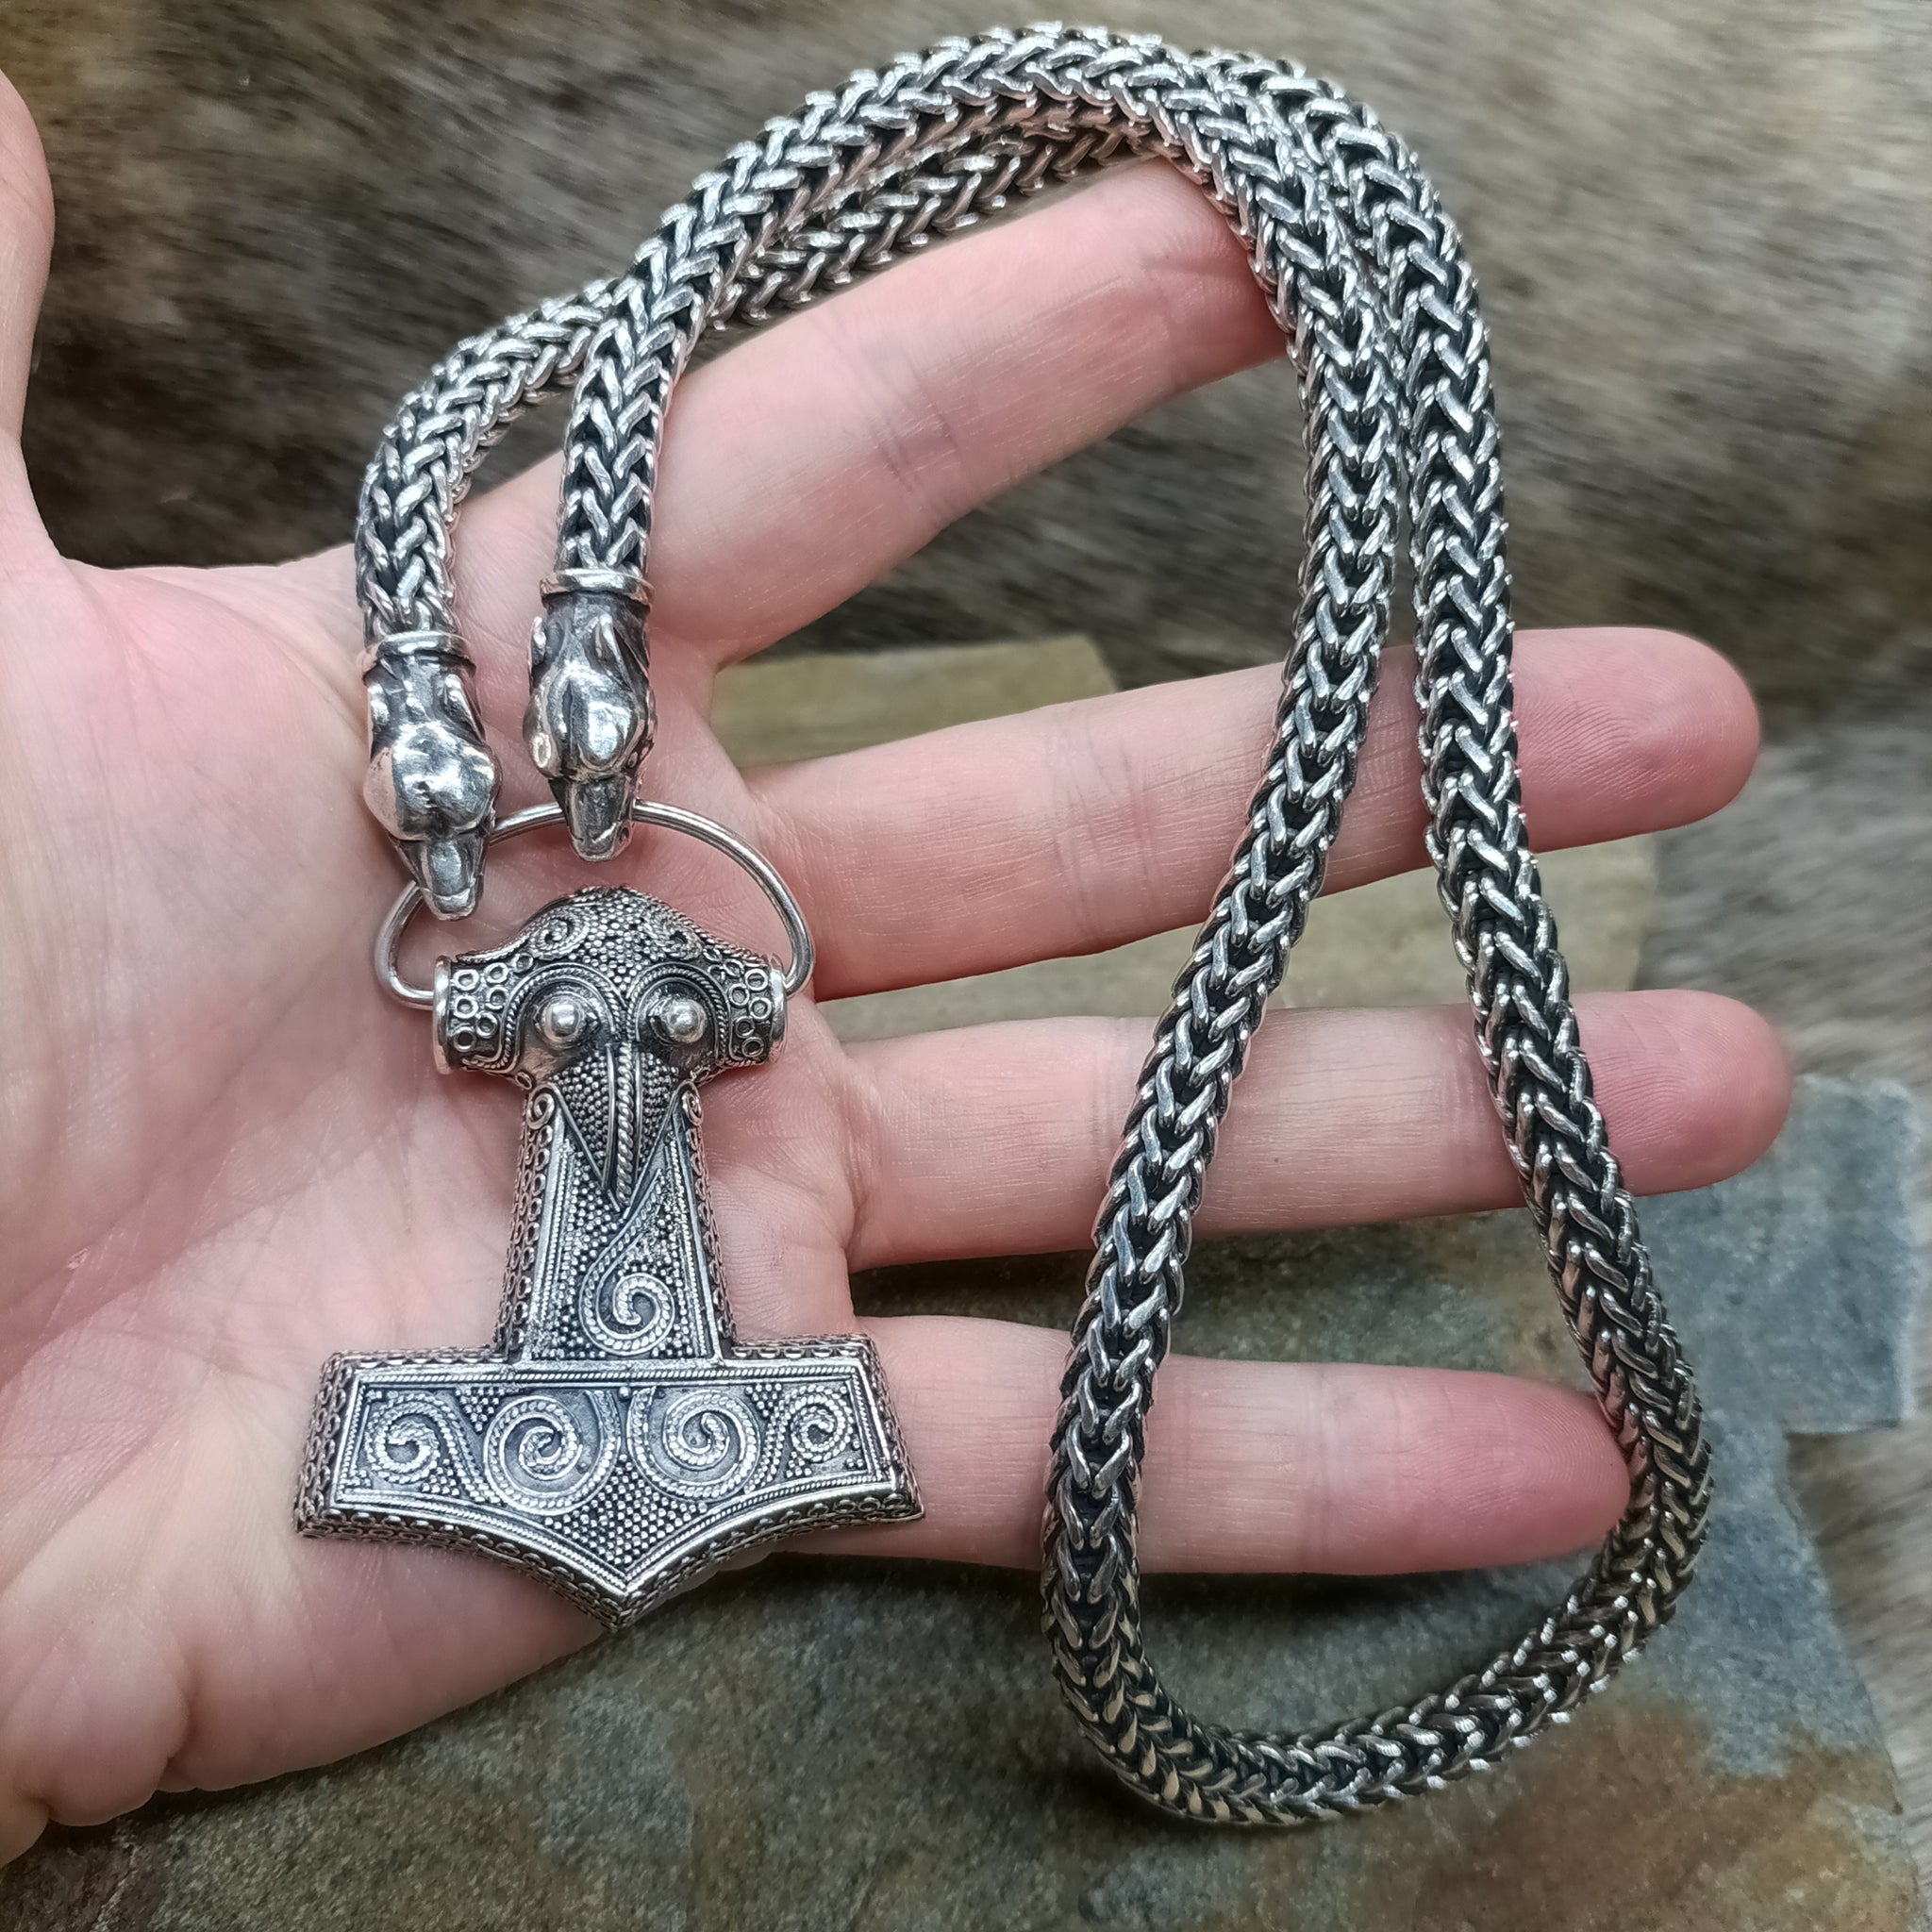 8mm Thick Silver Snake Chain Thors Hammer Necklace with Ferocious Wolf Heads and Large Silver Kabara Thors Hammer on Hand